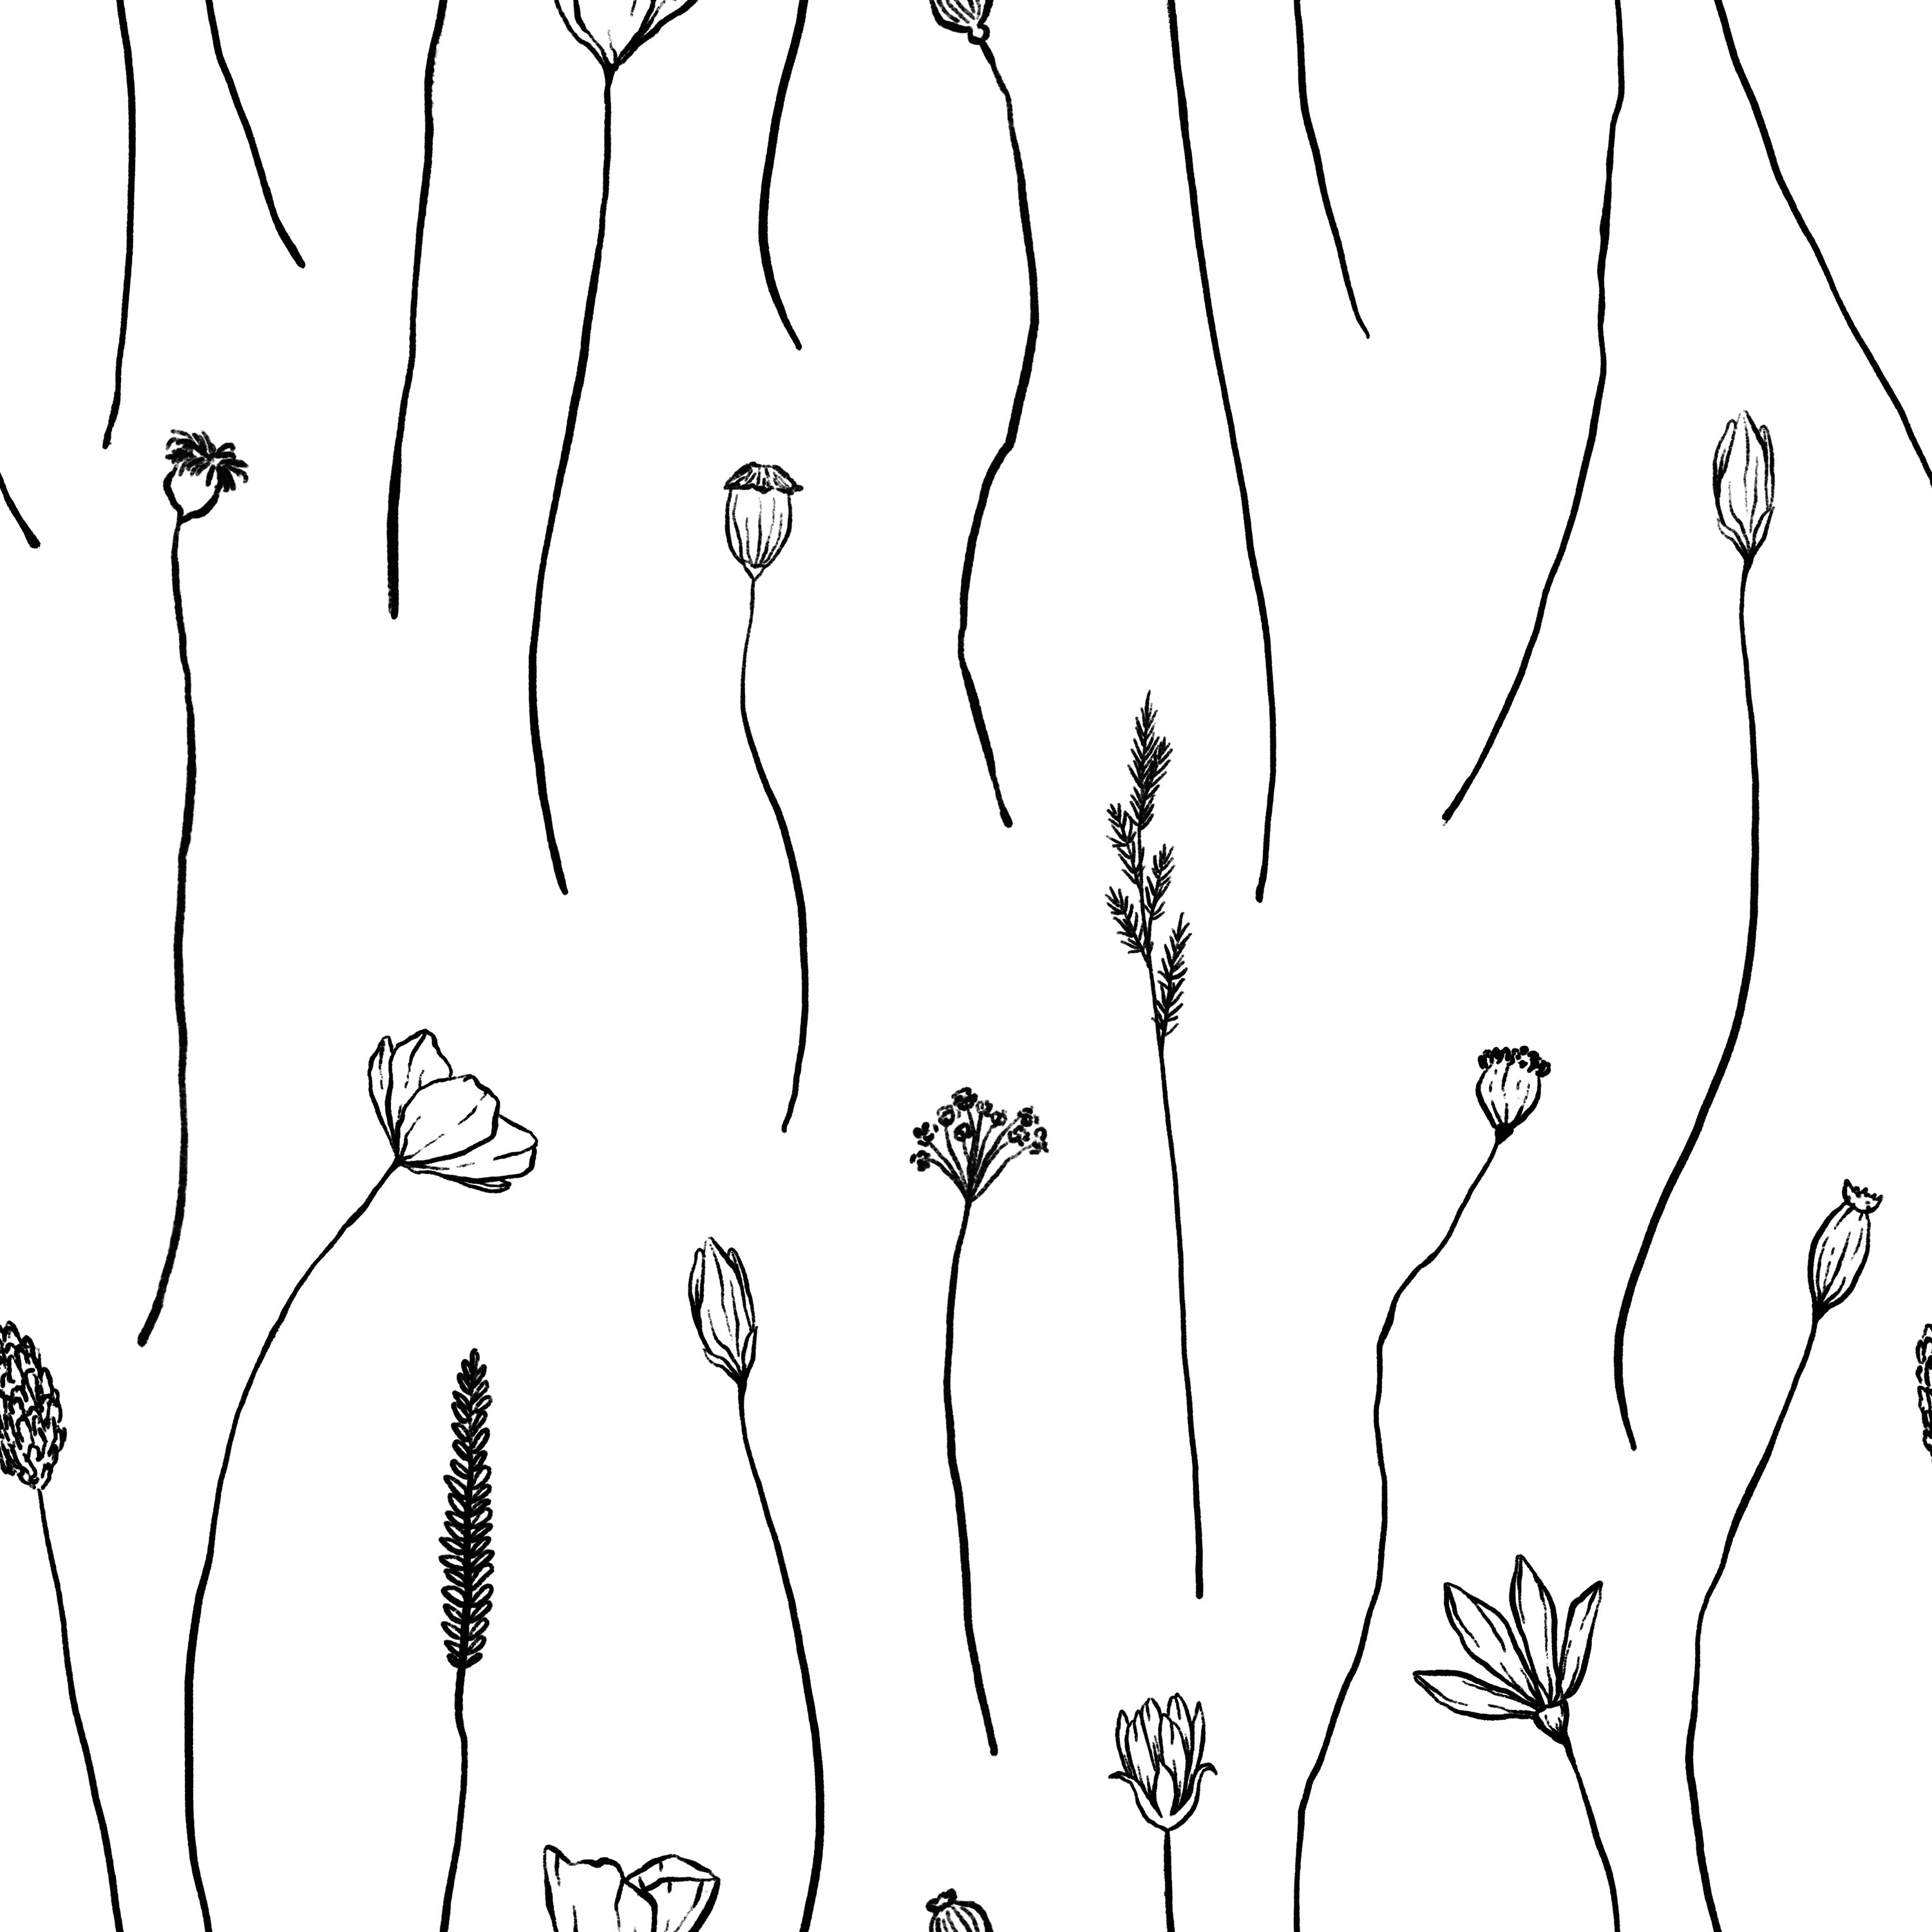 Close-up view of the 'Wildflower Sketch Wallpaper,' showcasing its delicate line art depicting various wildflowers. The simple yet sophisticated black sketches on a white background provide a serene and artistic backdrop, ideal for enhancing any living space.